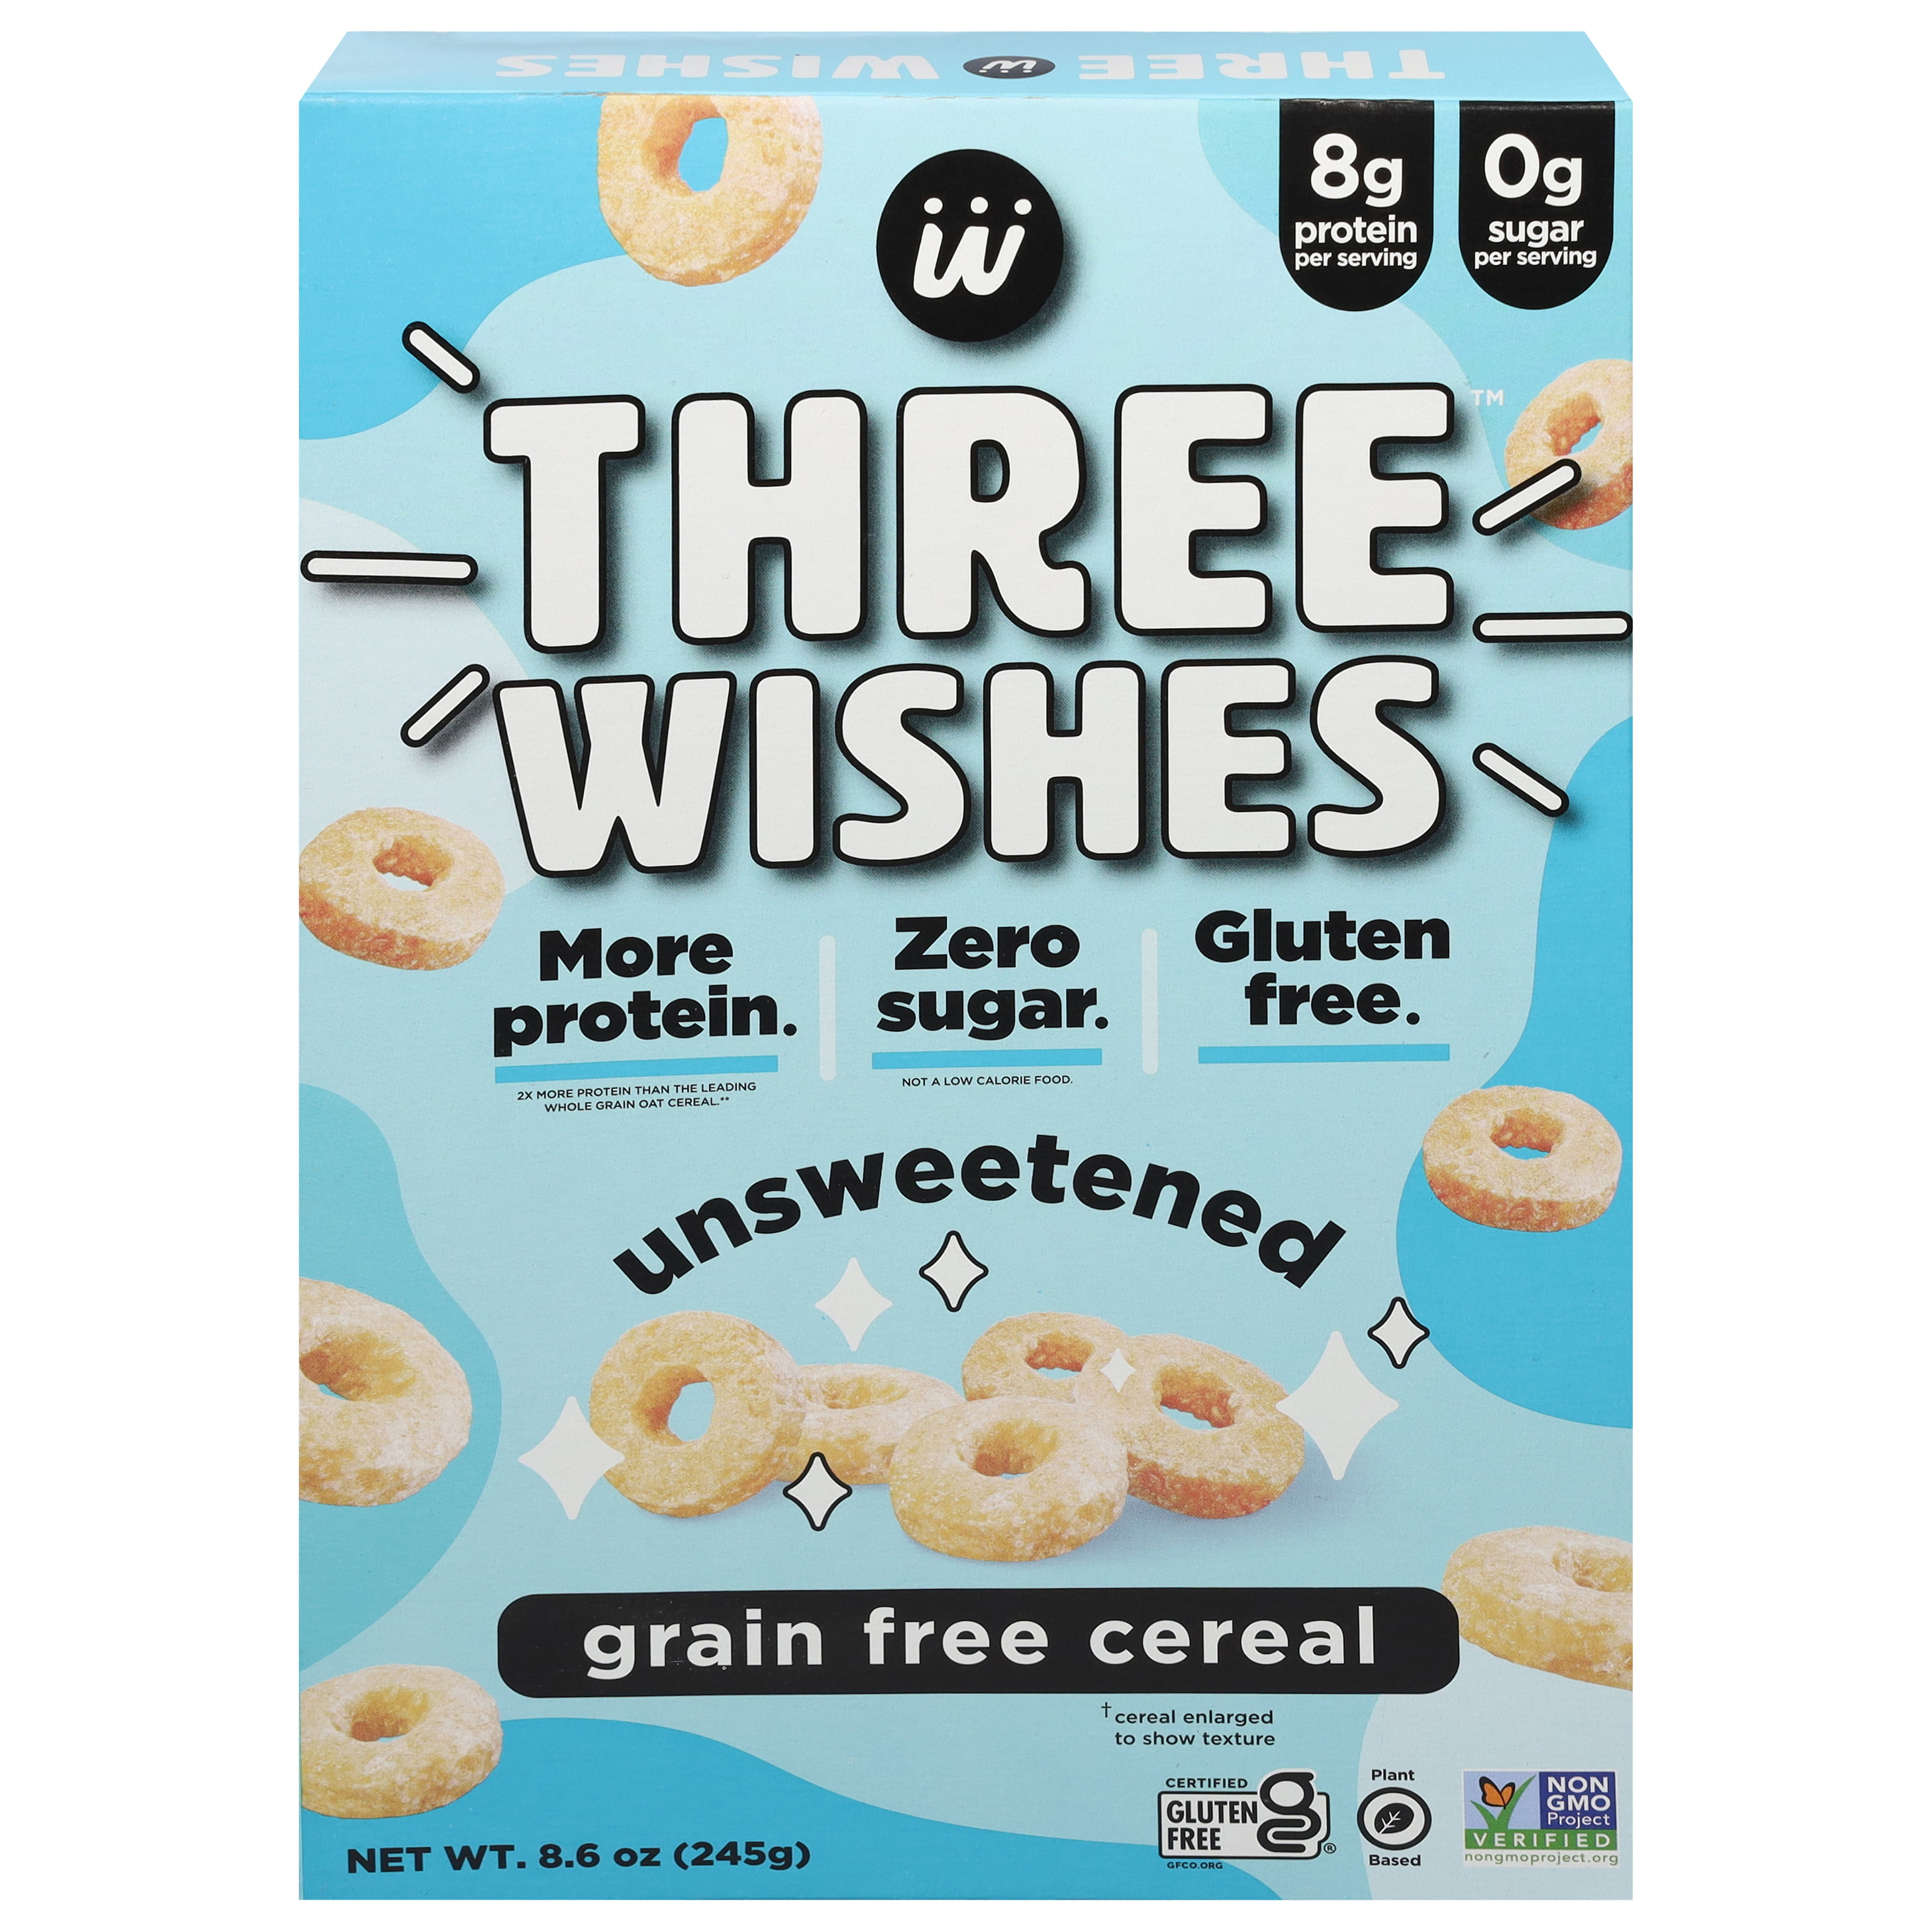 Buy Three Wishes Cereal Products at Whole Foods Market